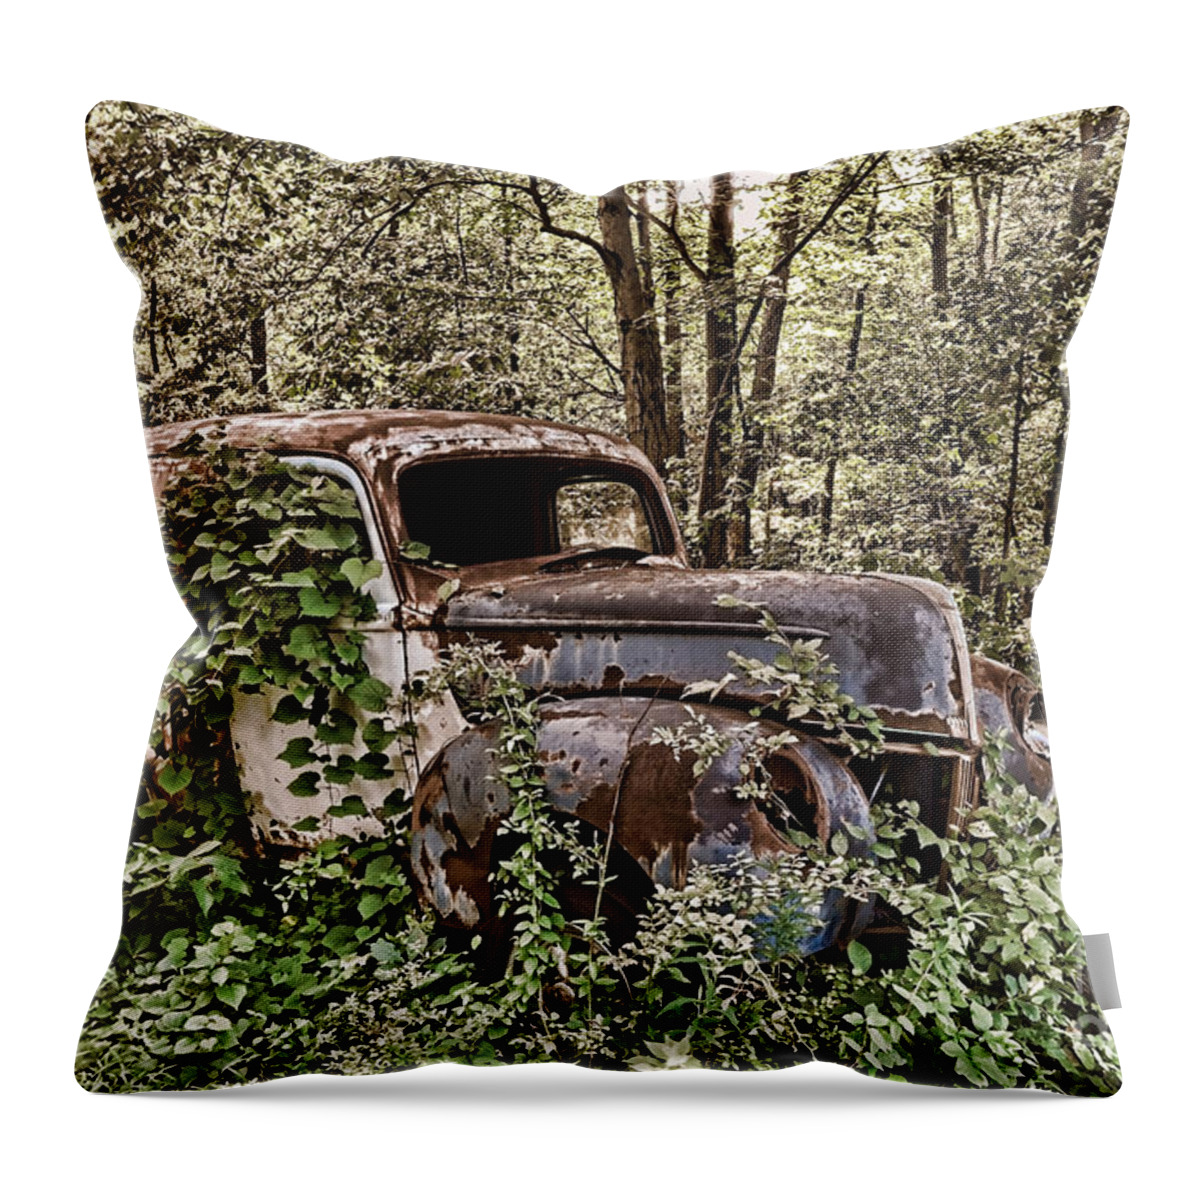 Abandoned Throw Pillow featuring the photograph Going Nowhere by Olivier Le Queinec